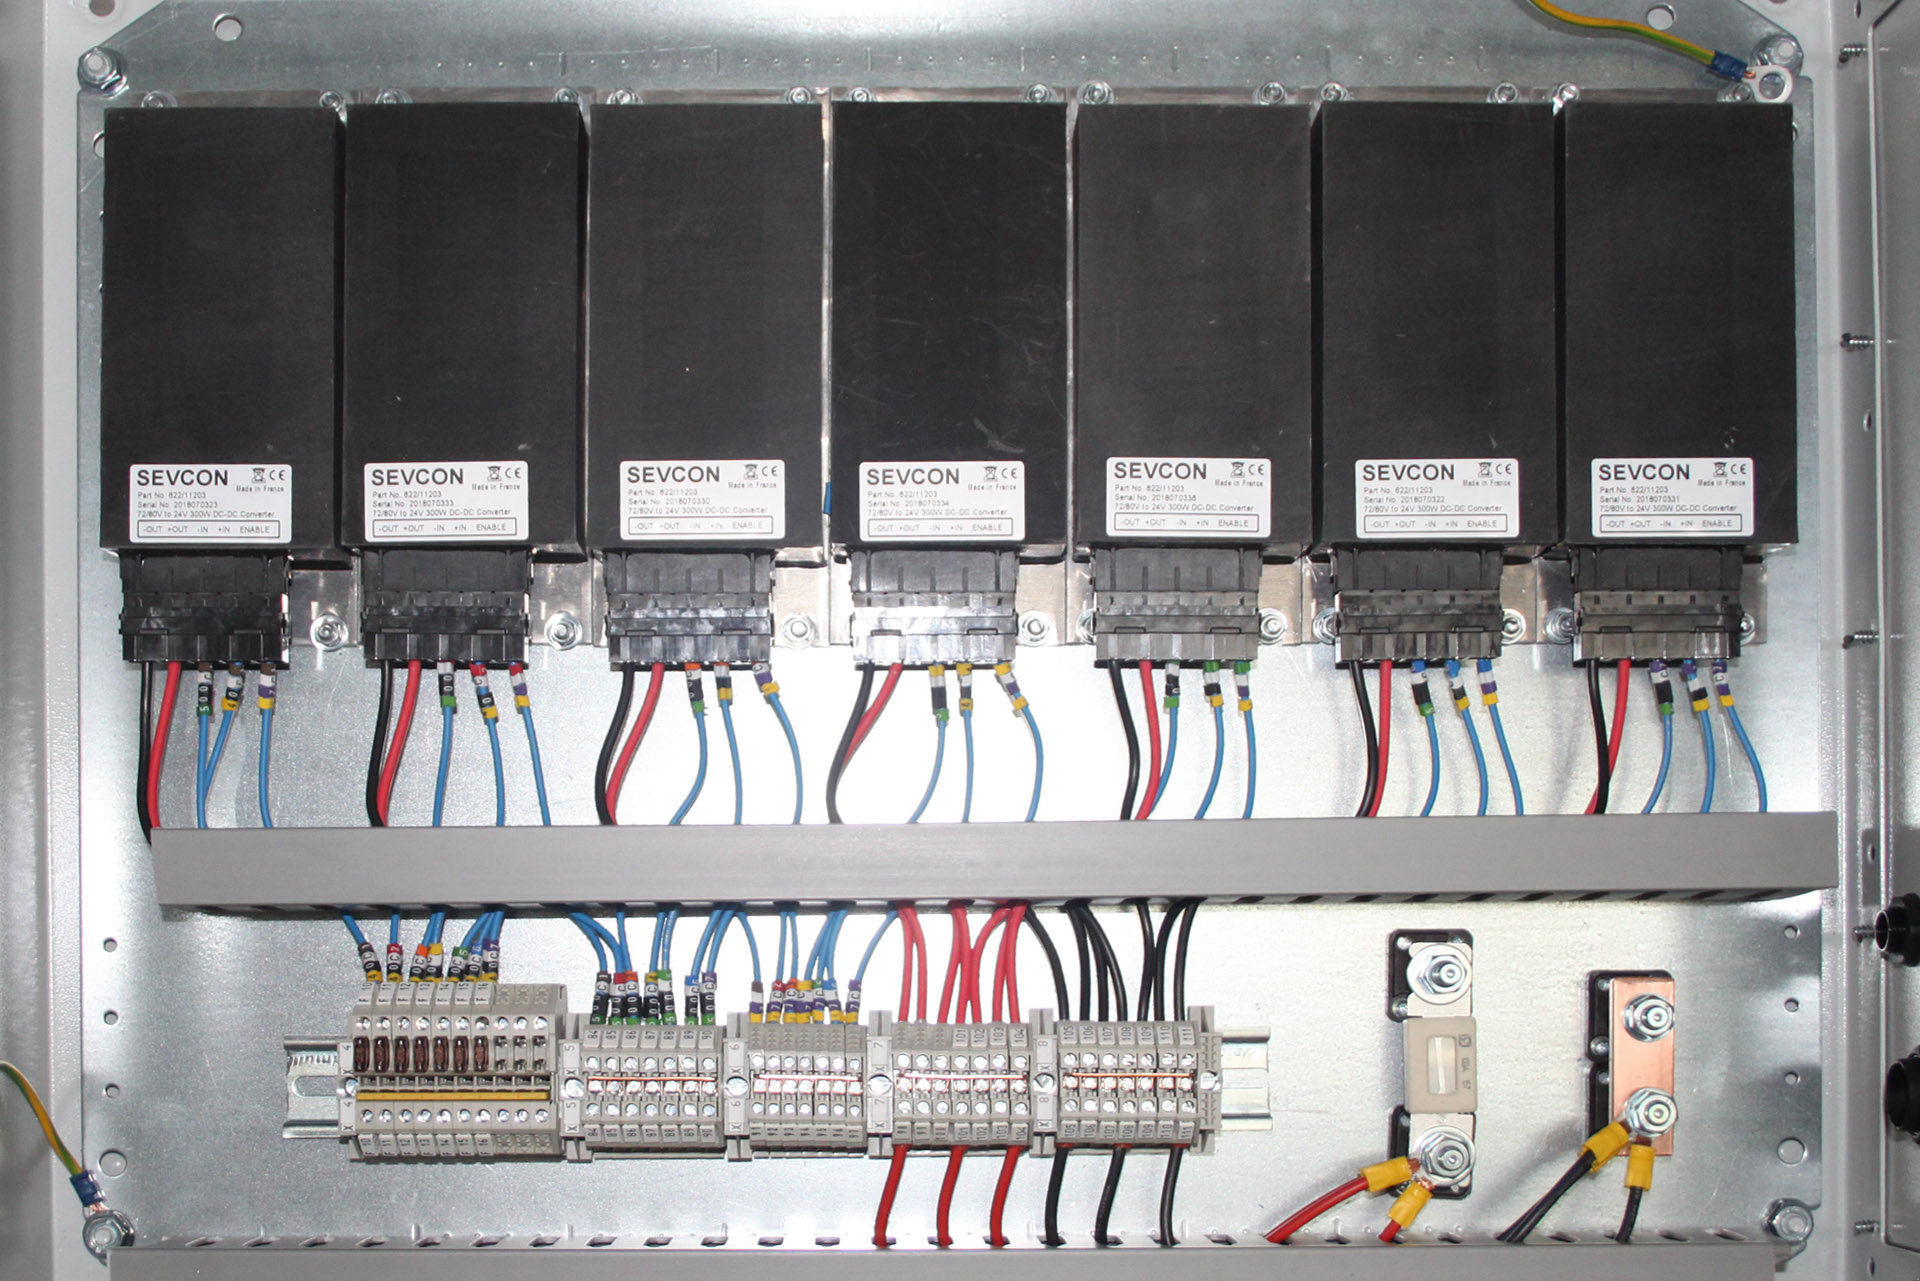 Cabinet containing connected electrical components